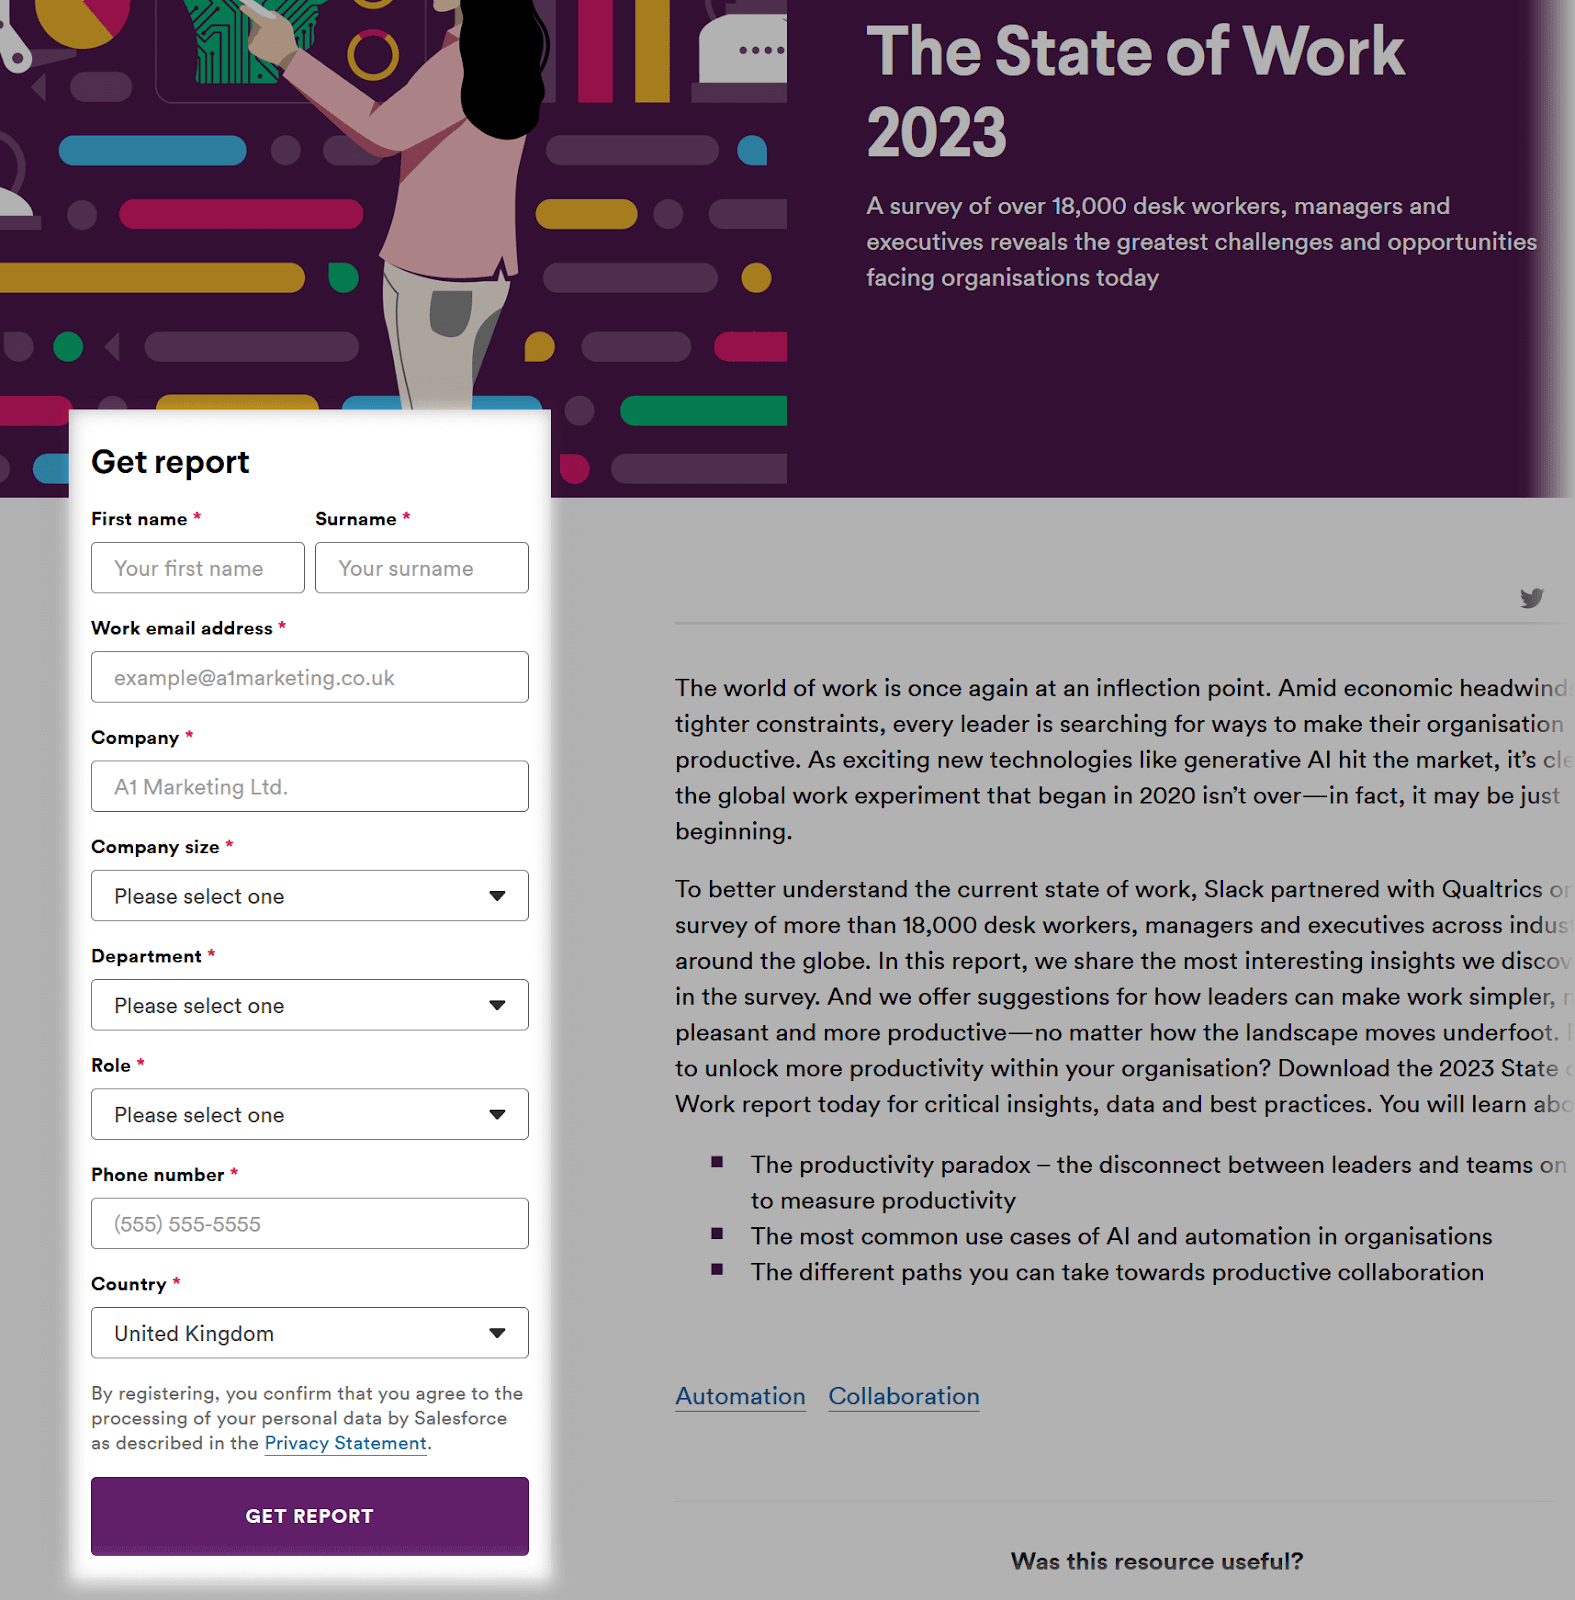 a form to download "The State of Work 2023" Slack report: